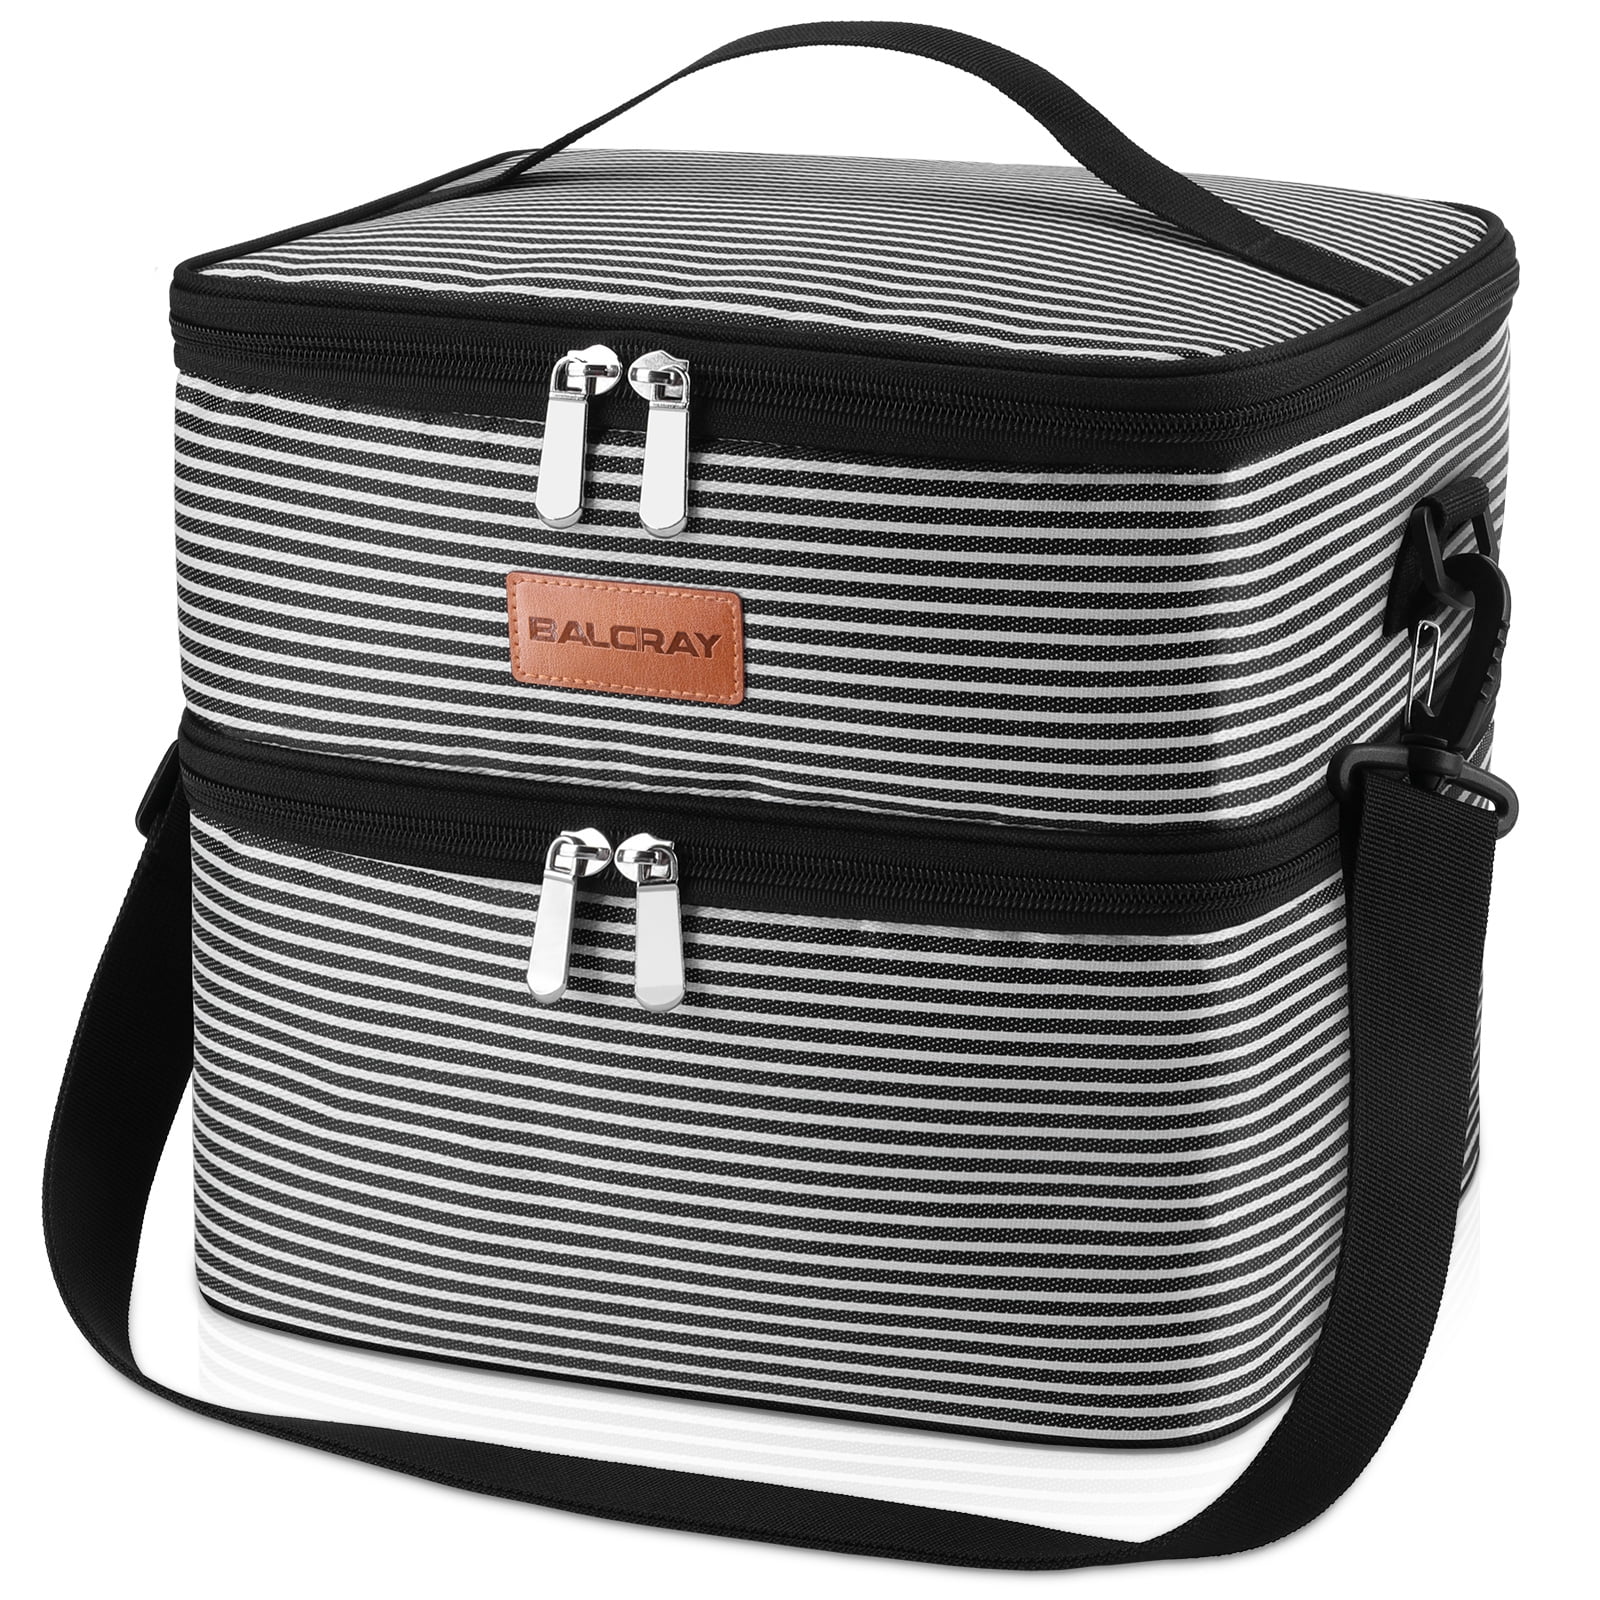 Lunch Bag Insulated Cooler Picnic Storage Box For Work Men Women Students School